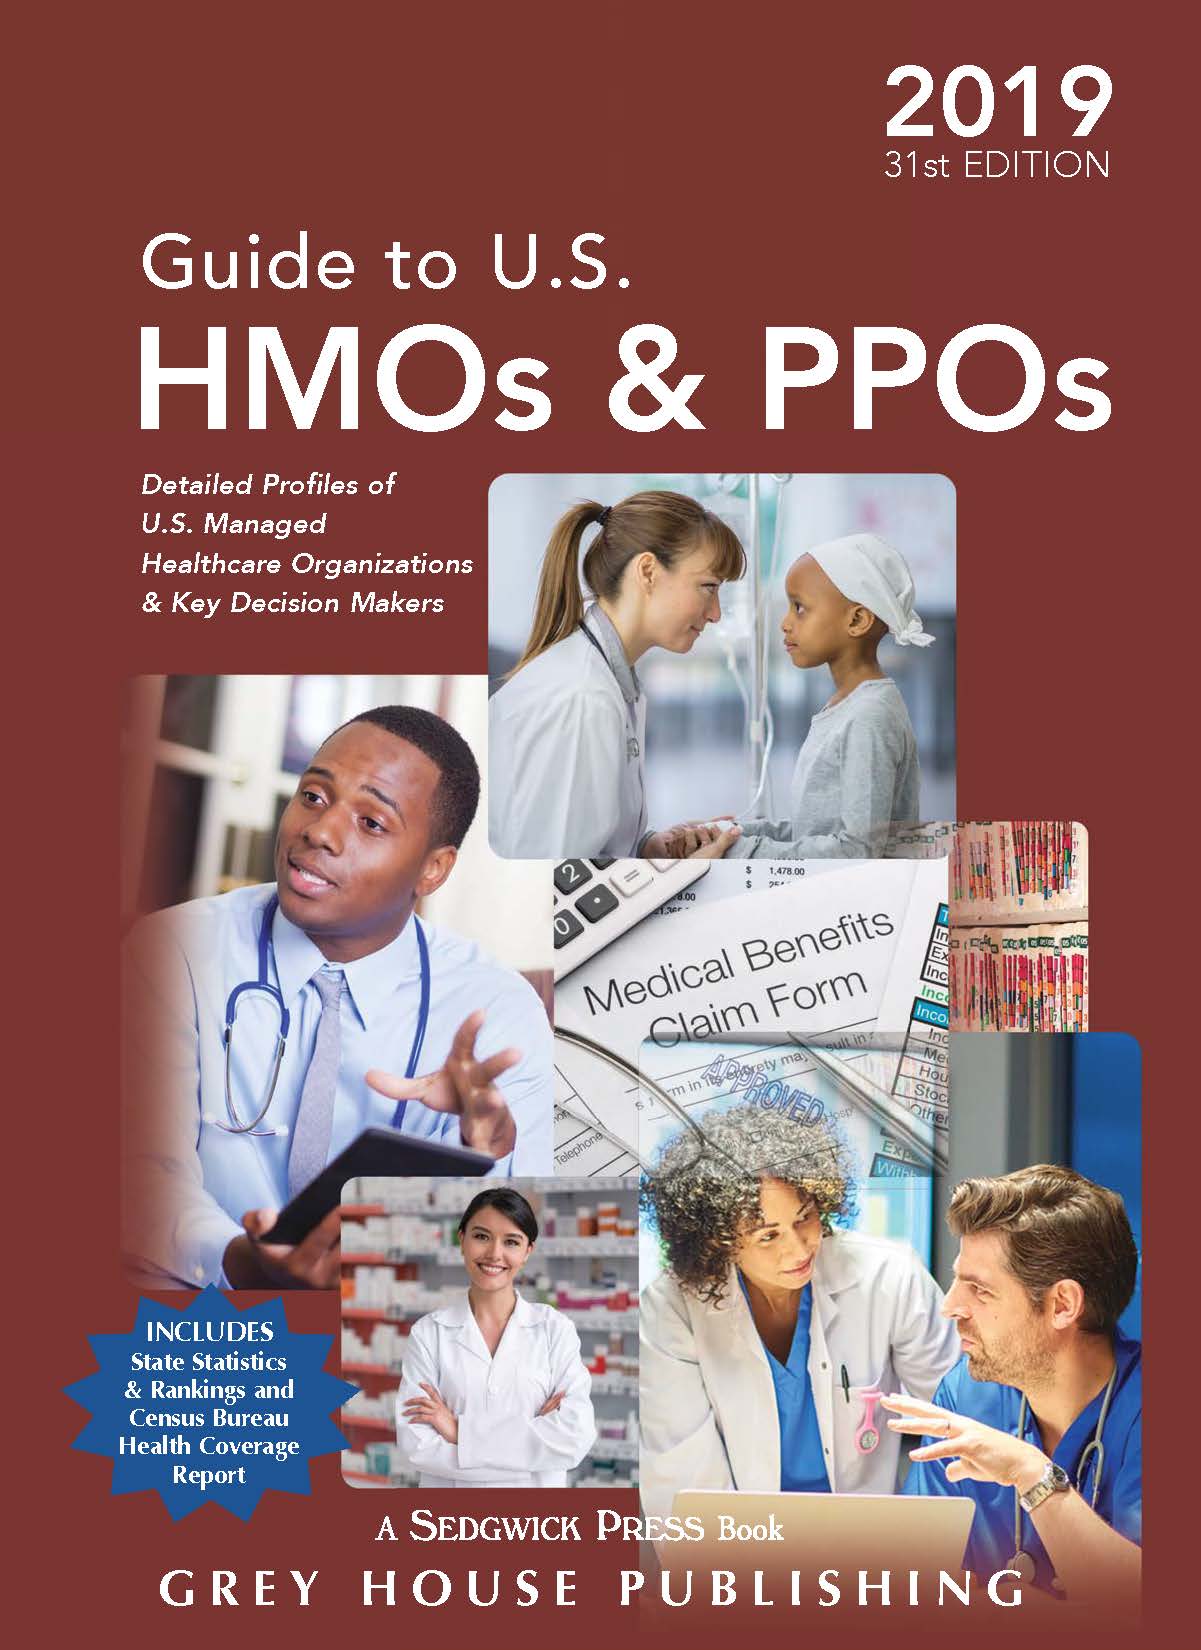 Guide to U.S. HMOs and PPOs